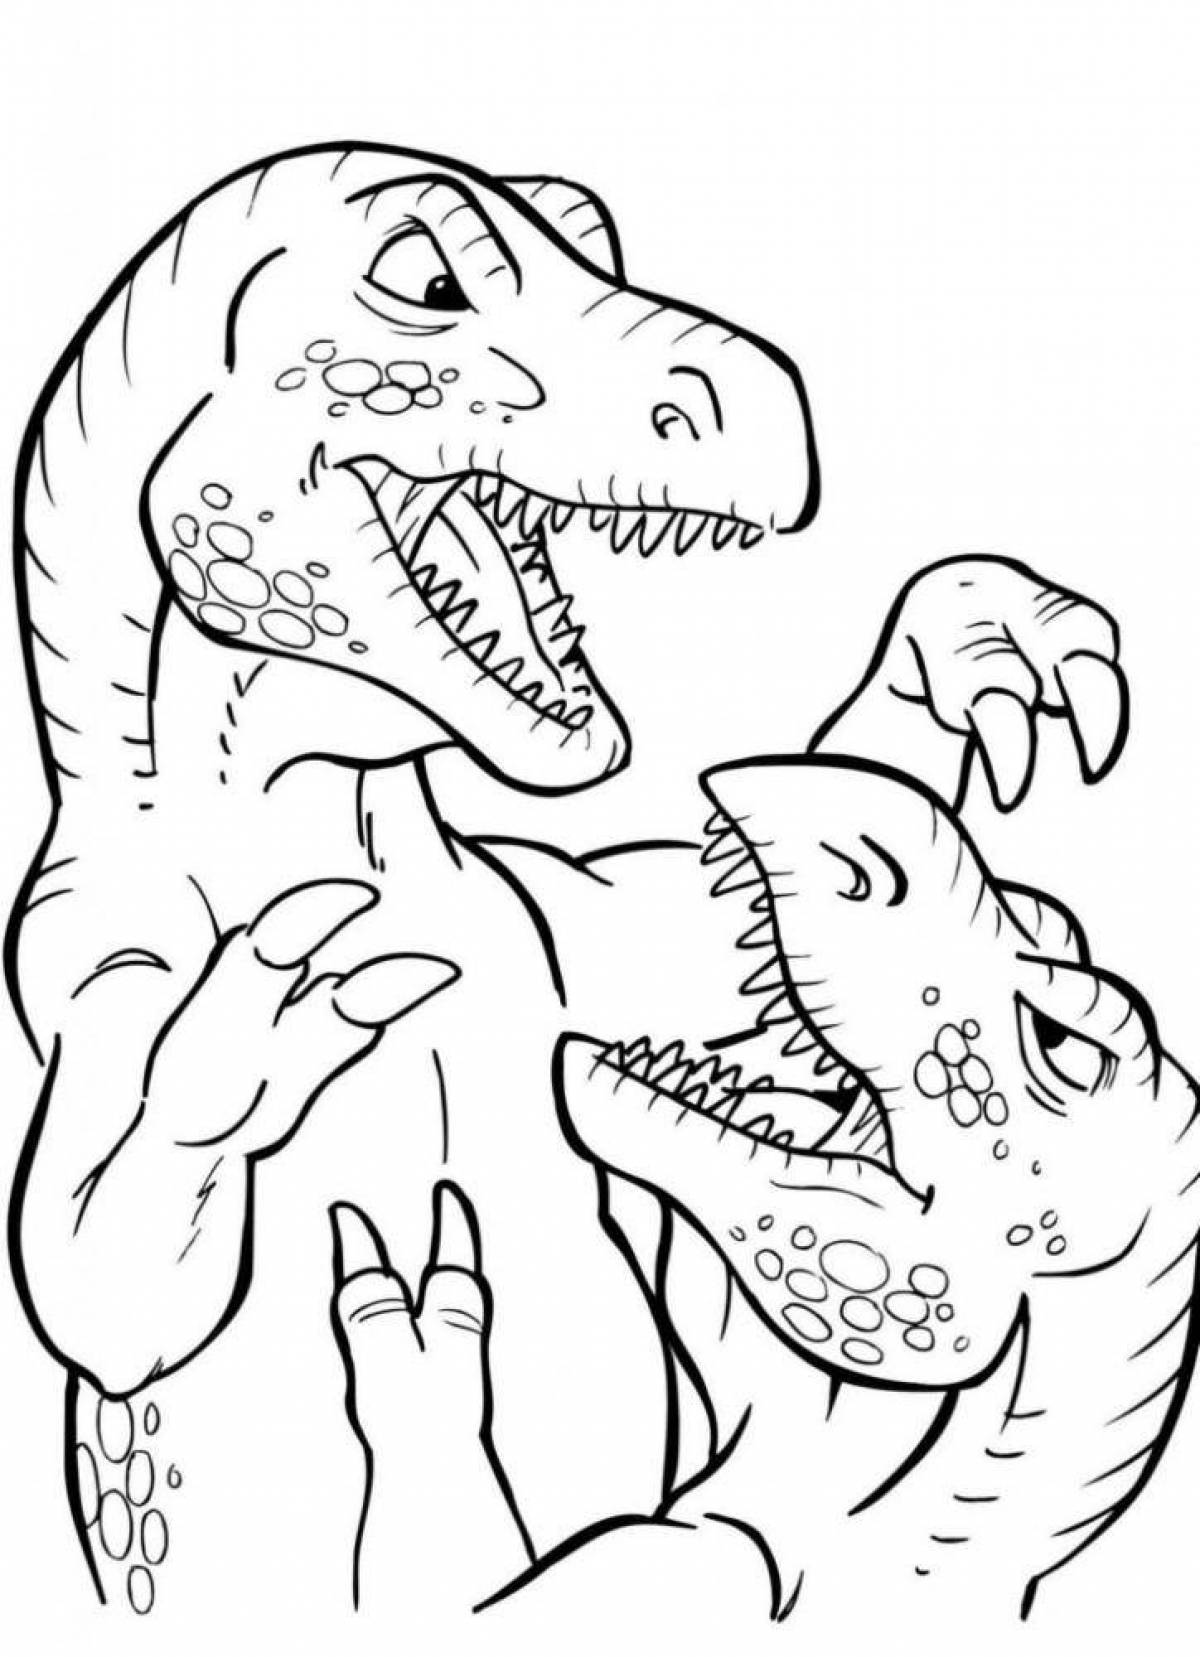 Tirex bright coloring page